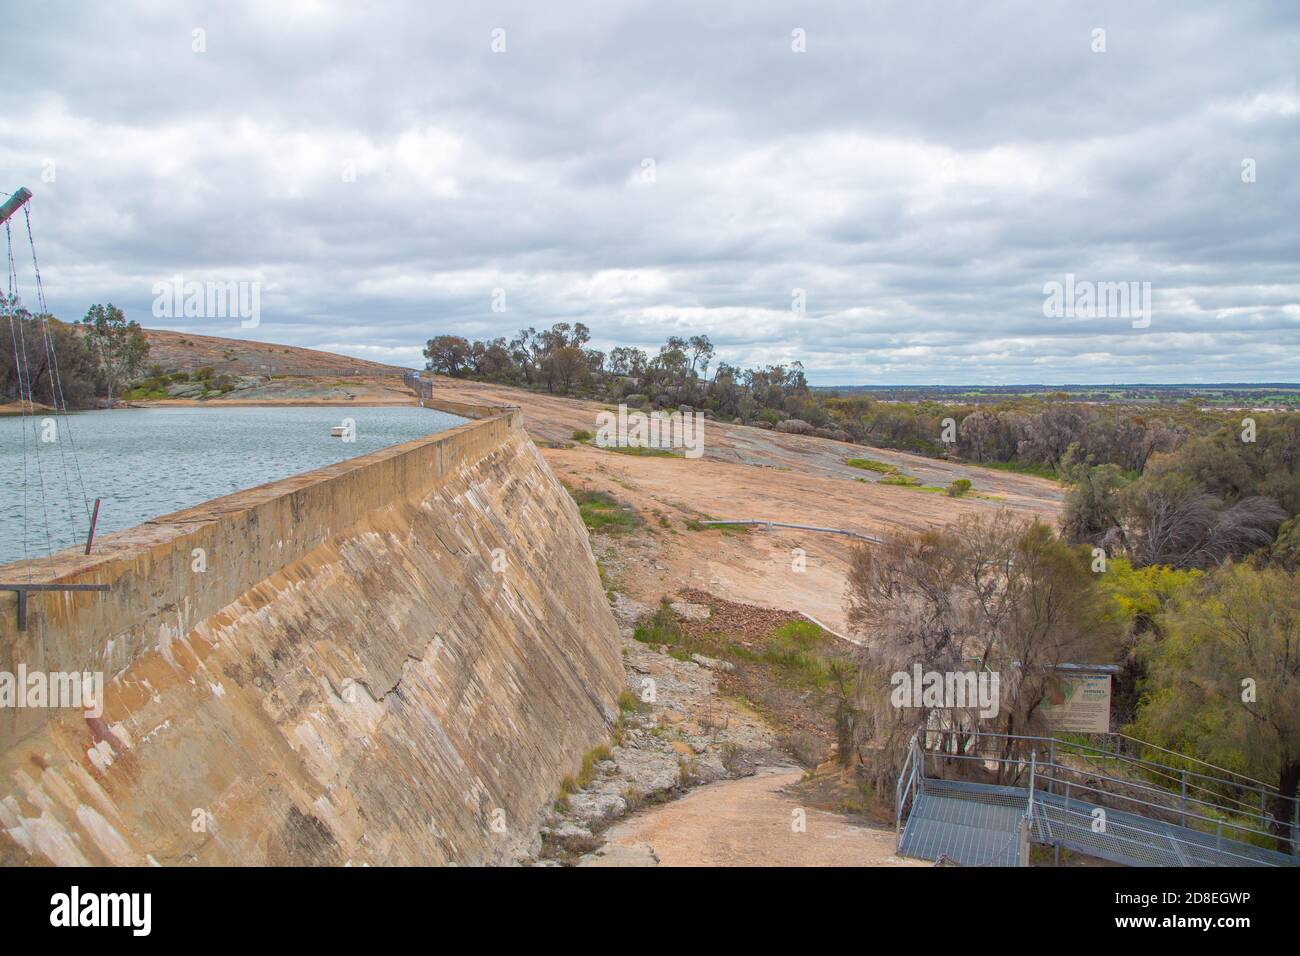 View from Wave Rock with Dam on the left closee to Hyden, Western Australia Stock Photo